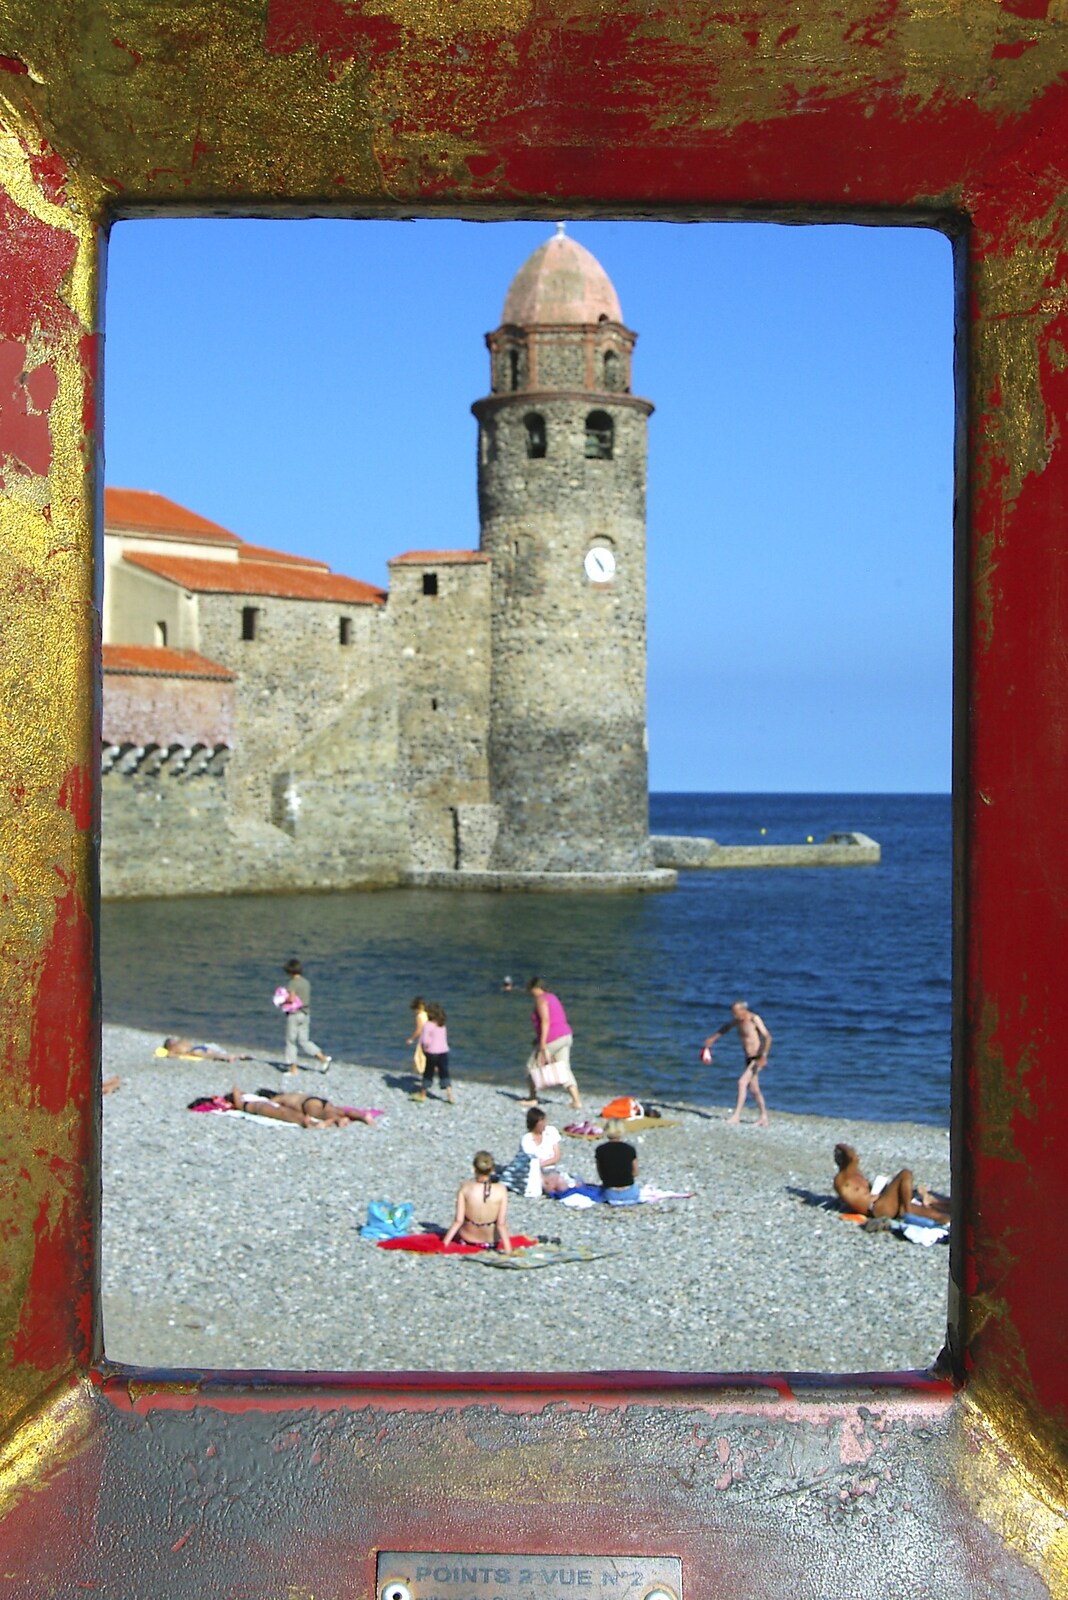 A view of the church and beach through a frame from The Colourful Boats of Collioure, France - 20th September 2006